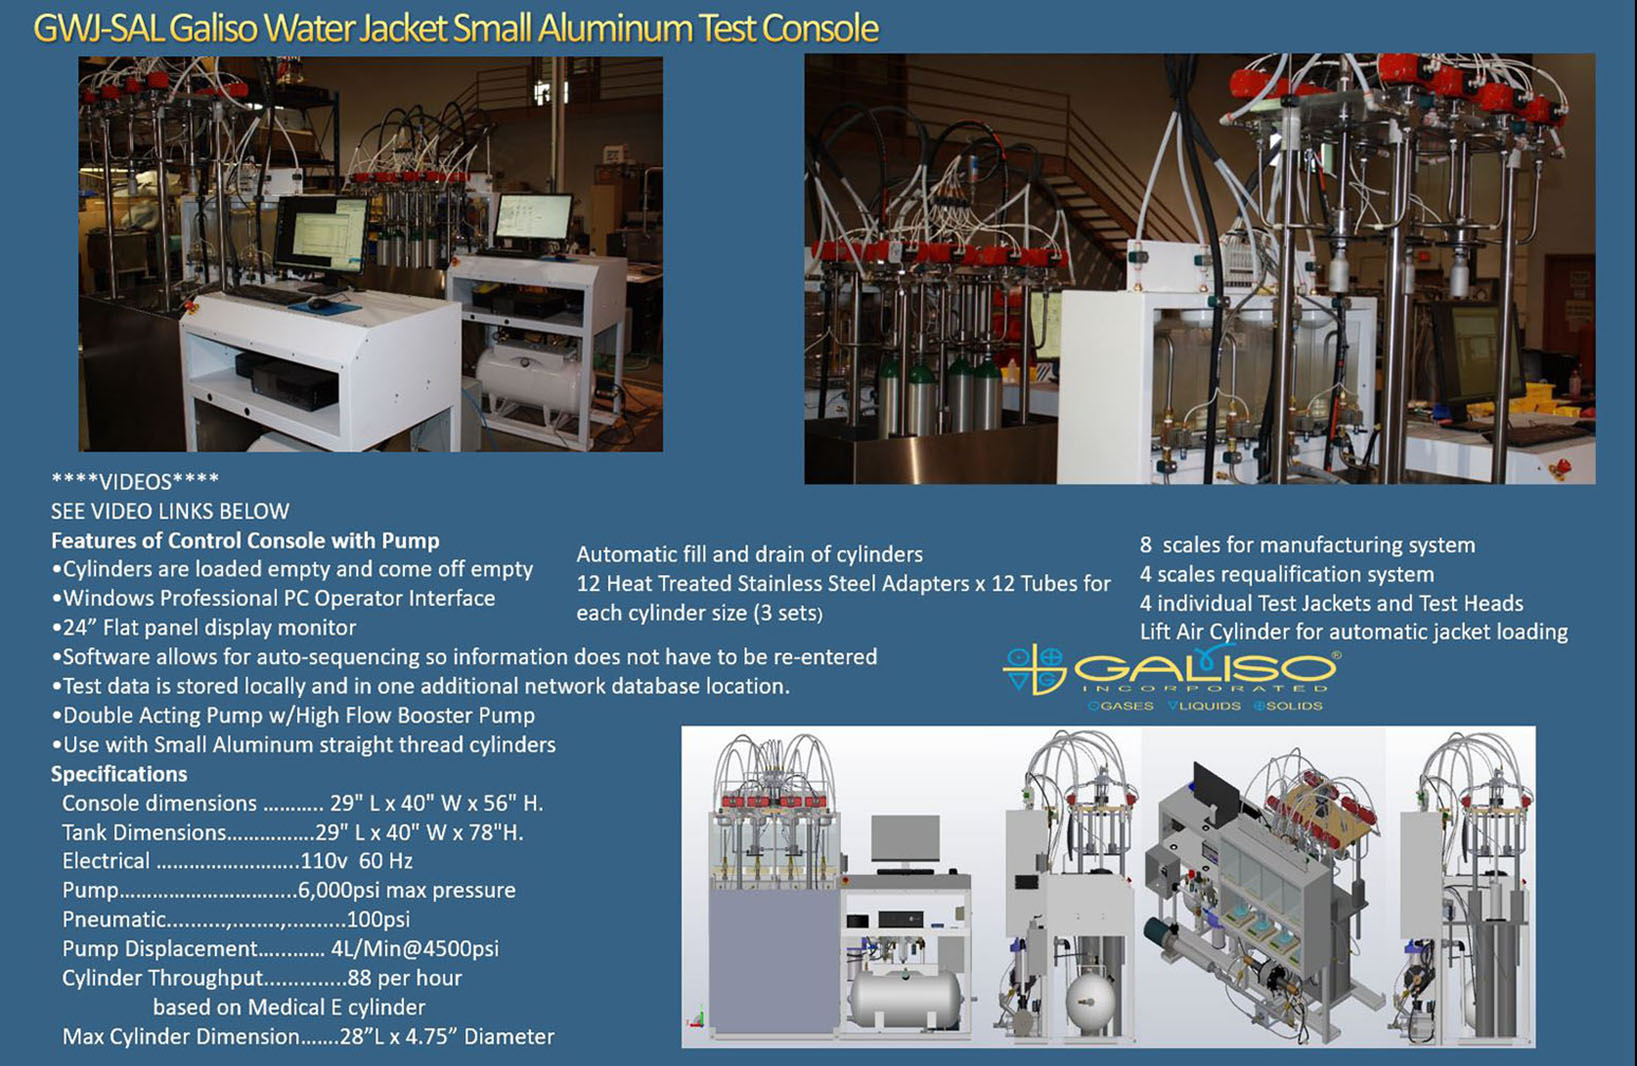 Galiso Water Jacket Small Aluminum Hydrostatic Test Console